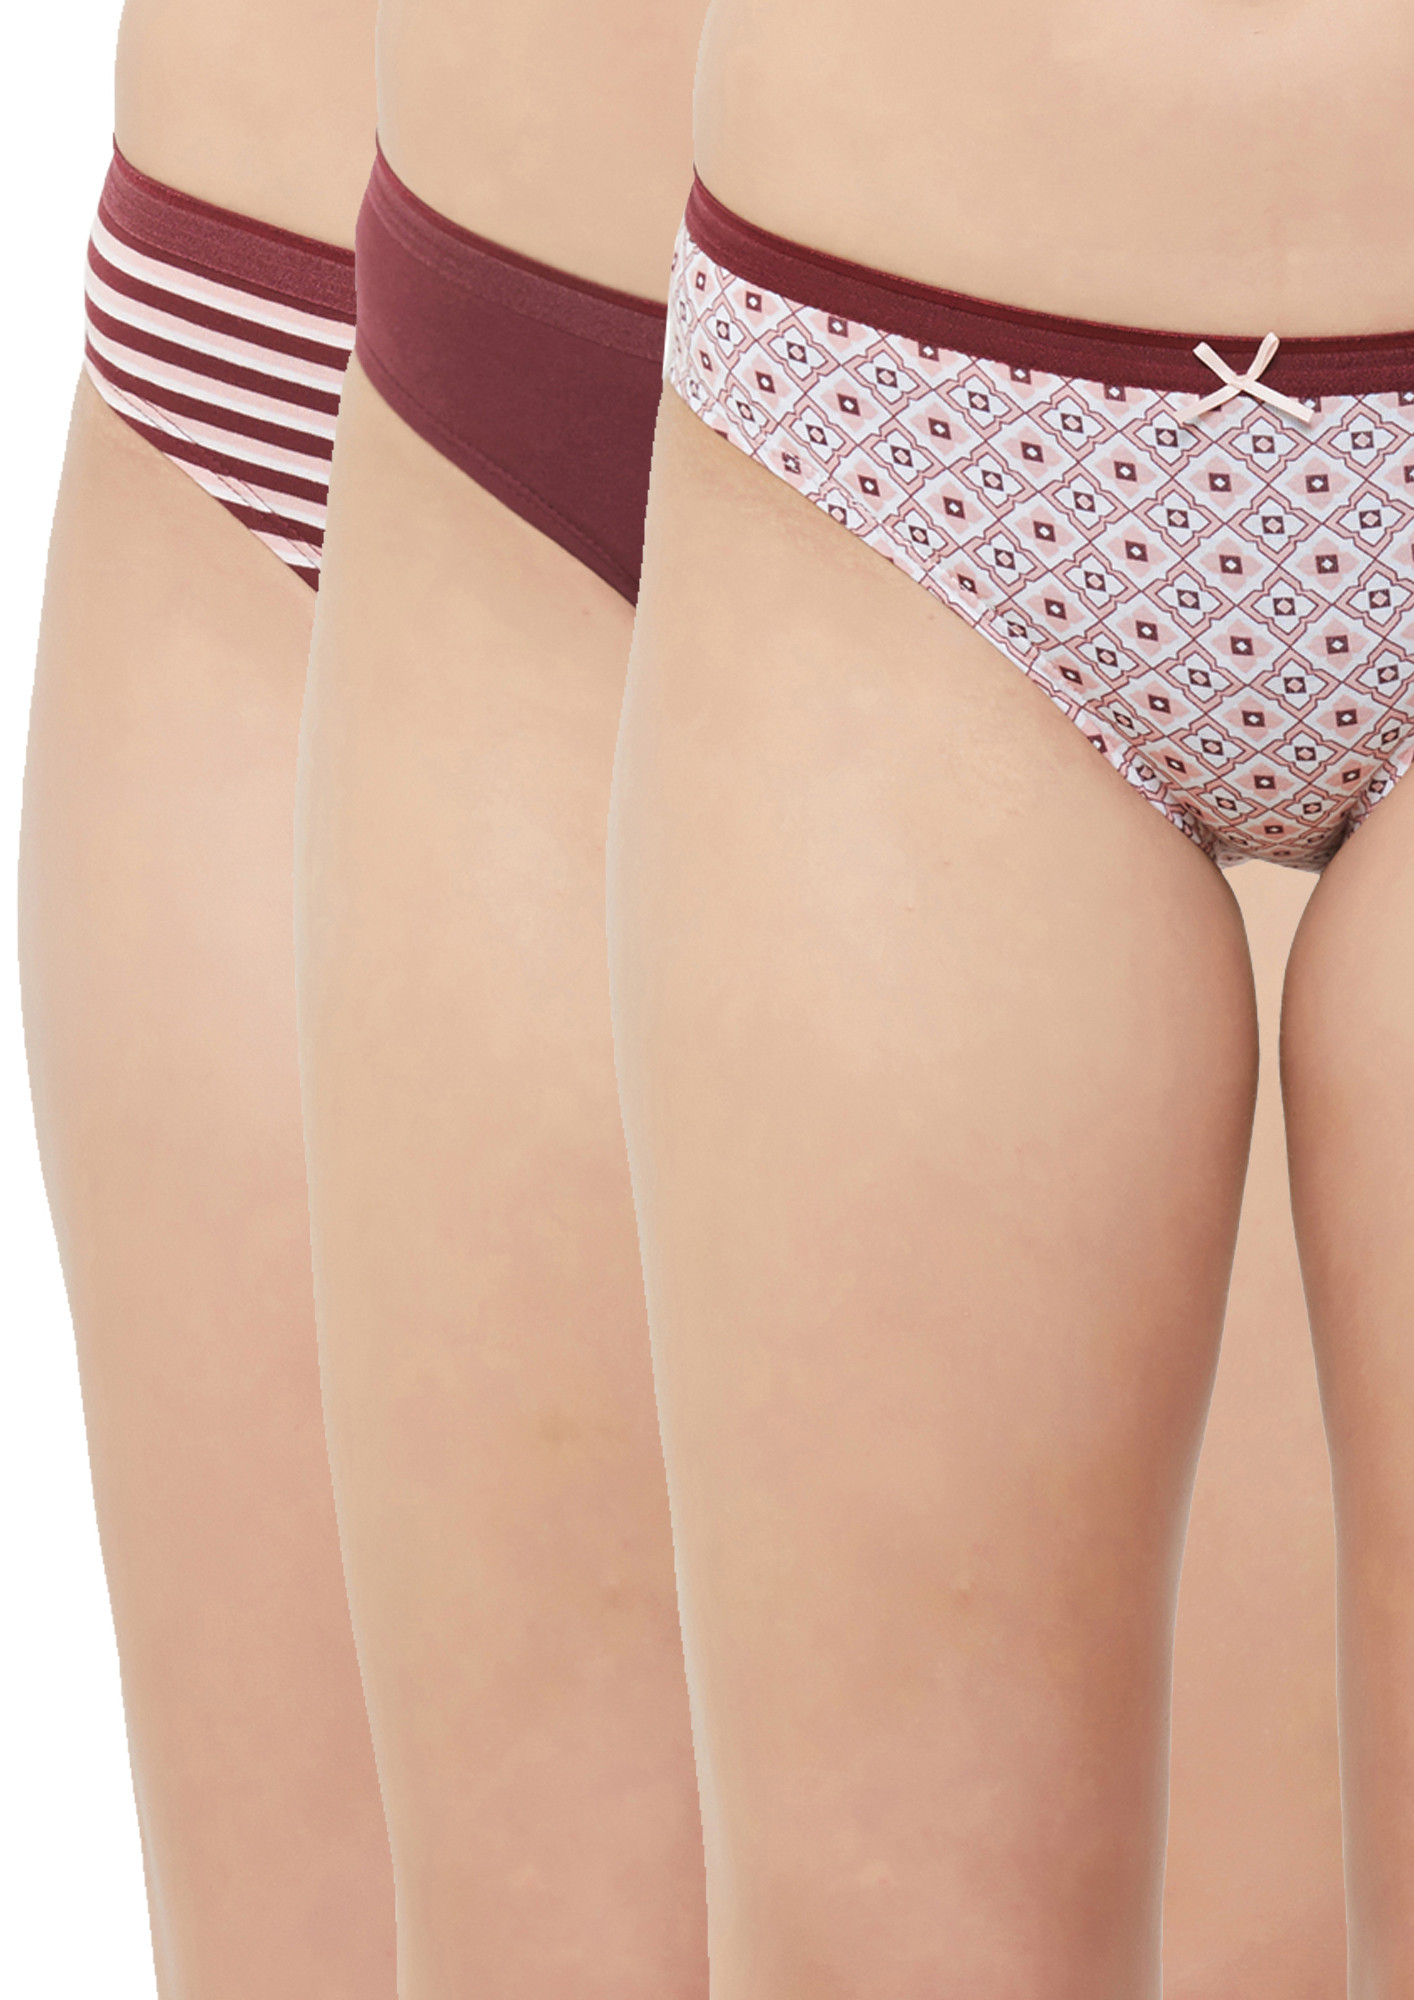 SOIE Printed Stripe Rosewood & White Brief Panty Combo (Pack of 3)